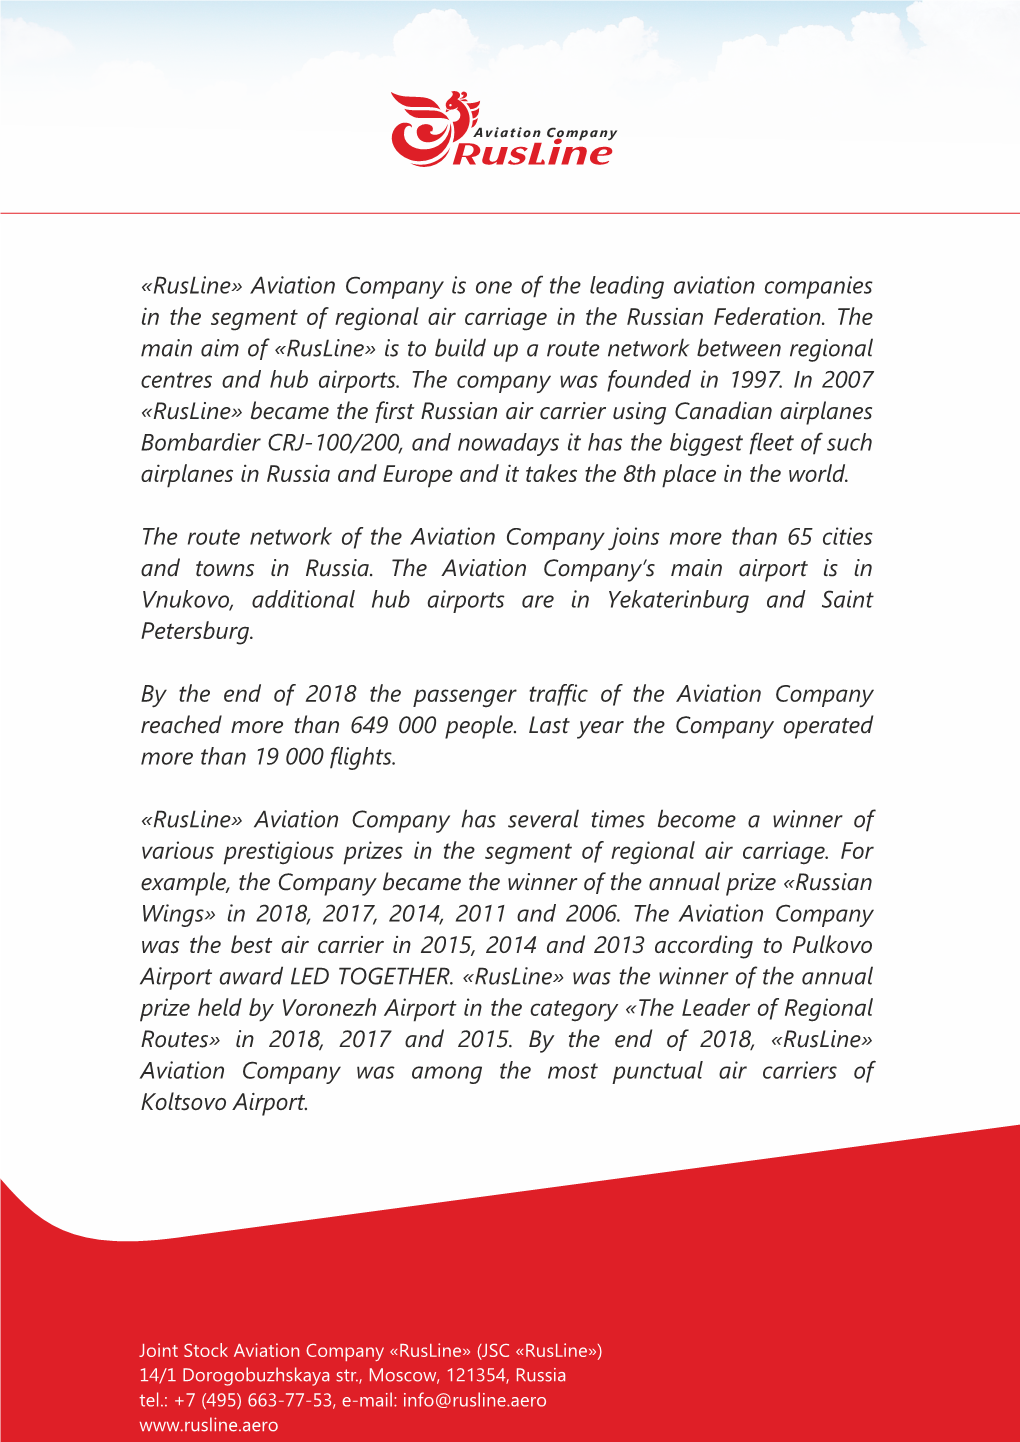 Rusline» Aviation Company Is One of the Leading Aviation Companies in the Segment of Regional Air Carriage in the Russian Federation